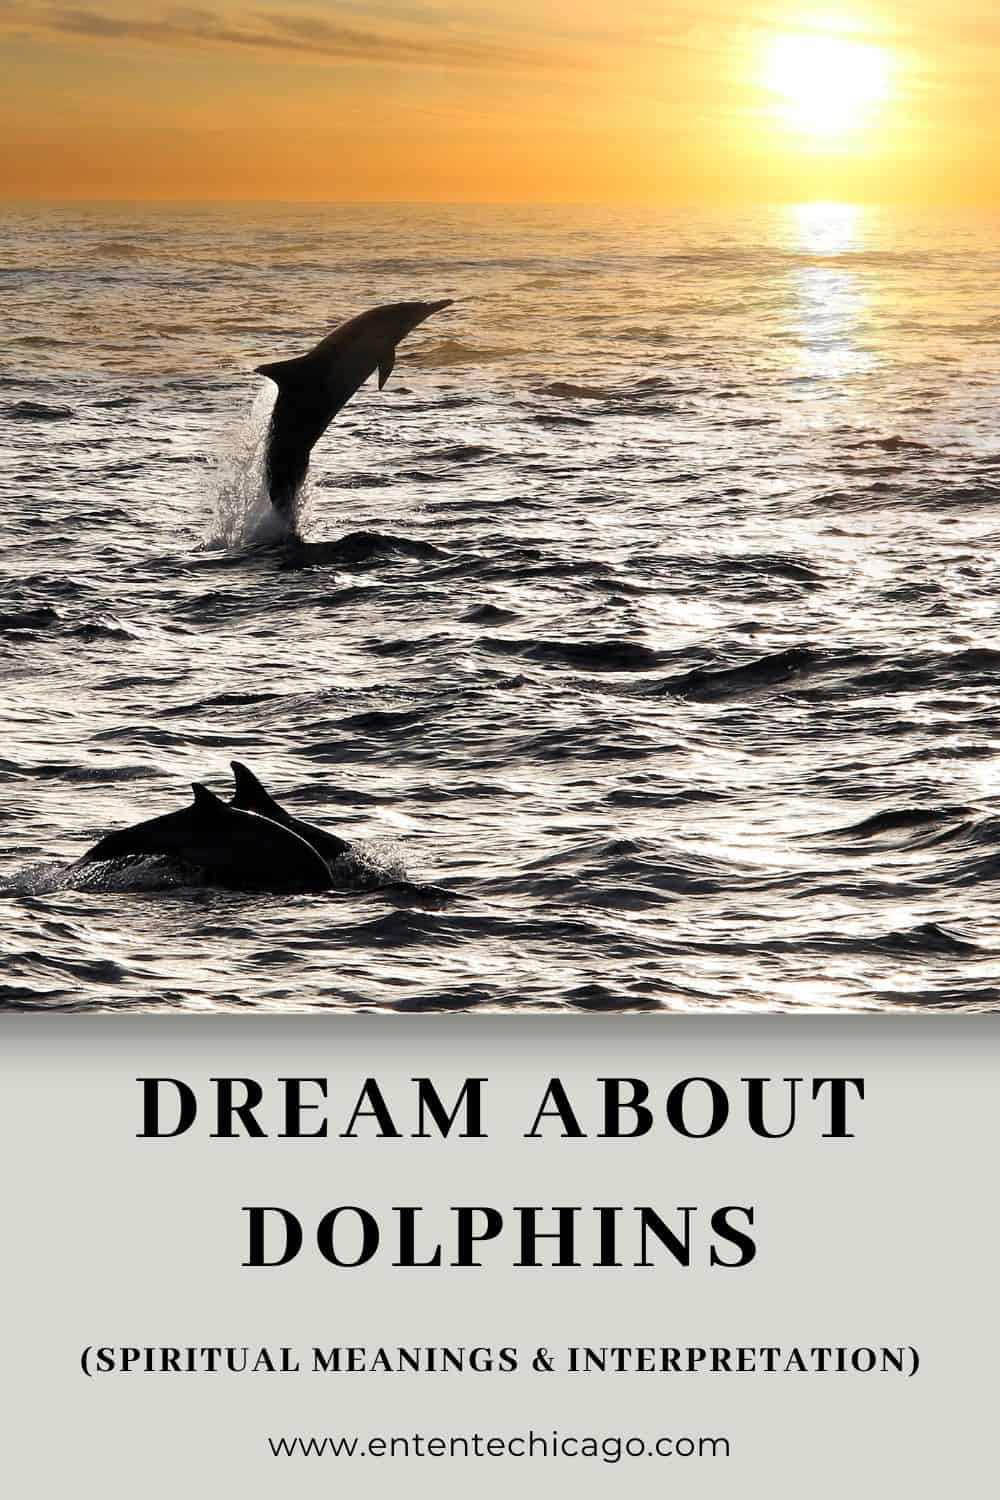 Dream About Dolphins (Spiritual Meanings & Interpretation)